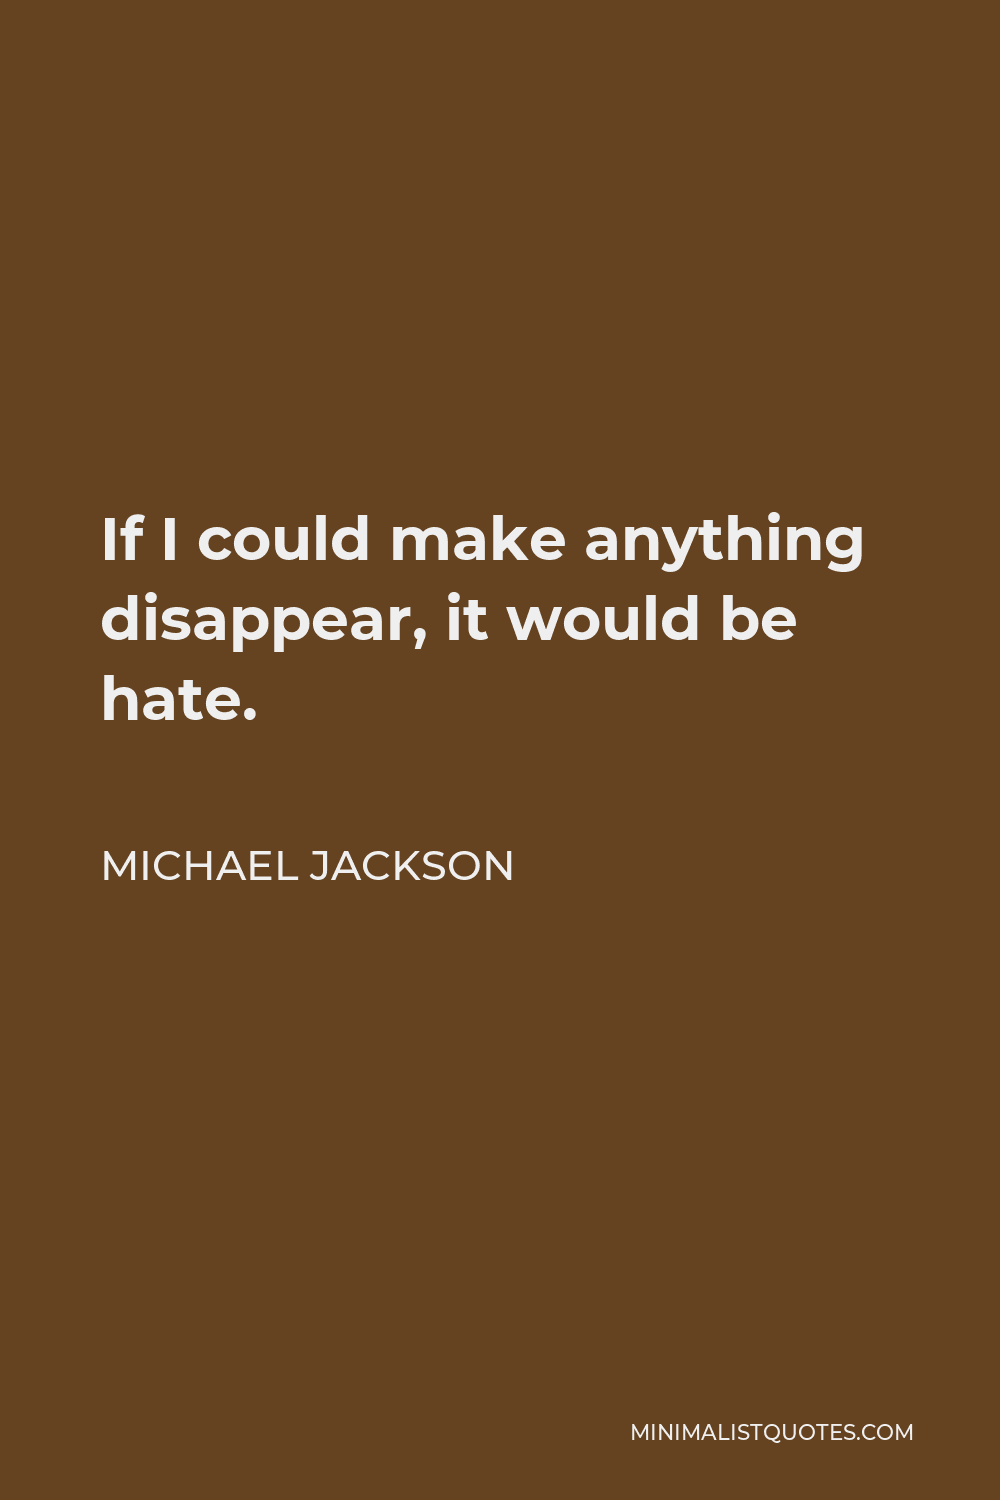 Michael Jackson Quote - If I could make anything disappear, it would be hate.